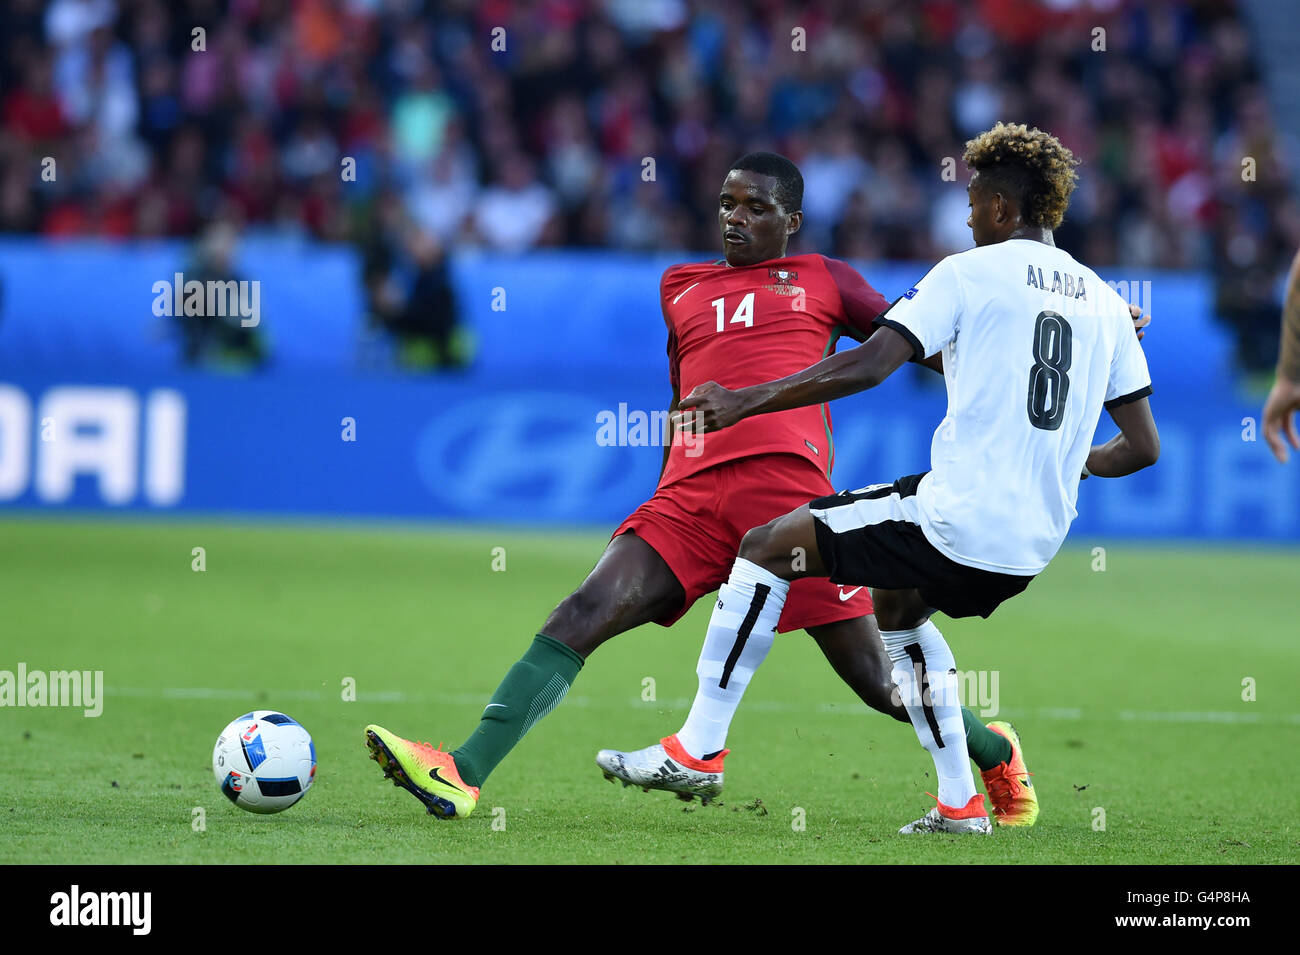 William Silva de Carvalho (Portugal)David Alaba (Austria) ; June 18; 2016- Football : Uefa Euro France 2016 Group Stage-MD2 ; Group F, Match 24 ; match between Portugal 0-0 Austria at Stade Parc des Princes ; Paris, France.; ;( photo by aicfoto)(ITALY) [0855] Stock Photo